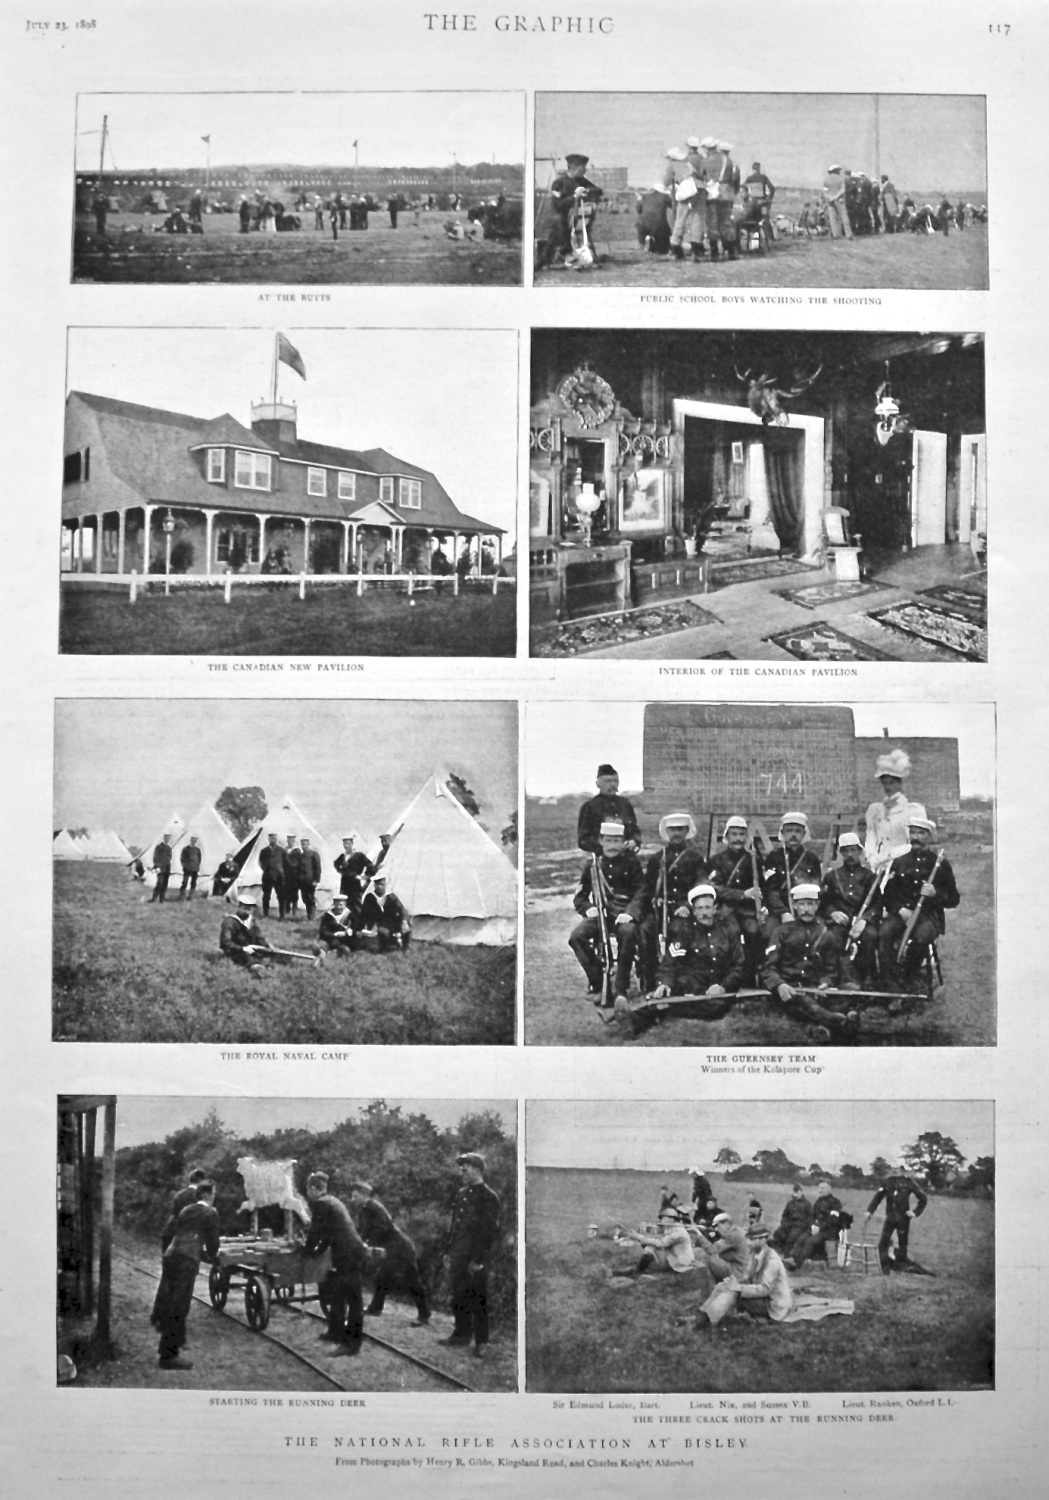 The National Rifle Association at Bisley. 1898.